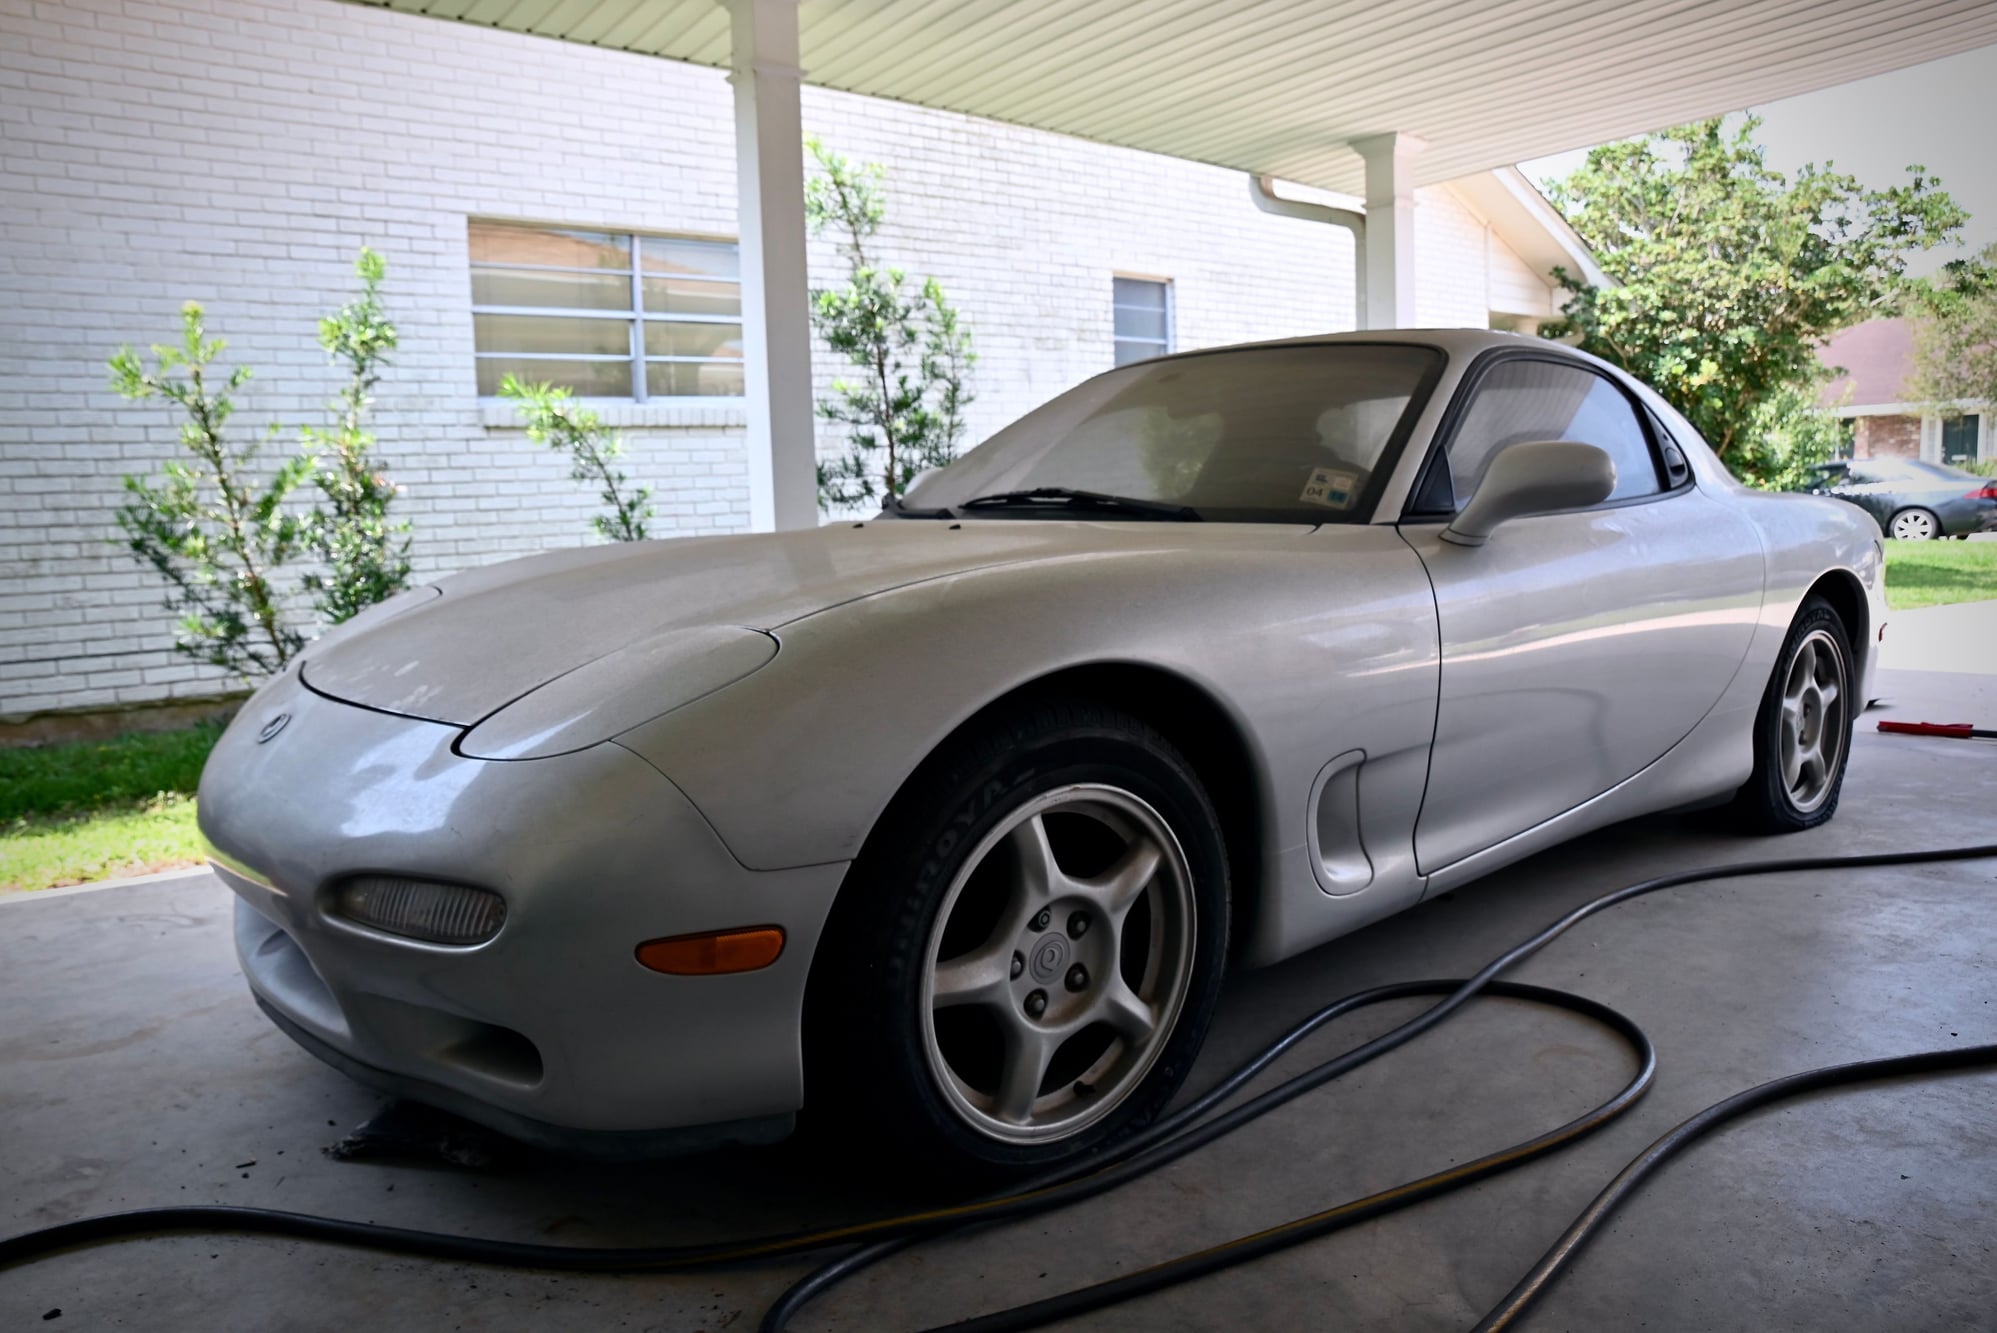 1993 Mazda RX-7 - FS: ~28k Mile - All Original 1993 SSM Touring Model - Used - VIN JM1FD331XP0208109 - 28,000 Miles - Other - 2WD - Manual - Coupe - Silver - New Orleans, LA 70123, United States